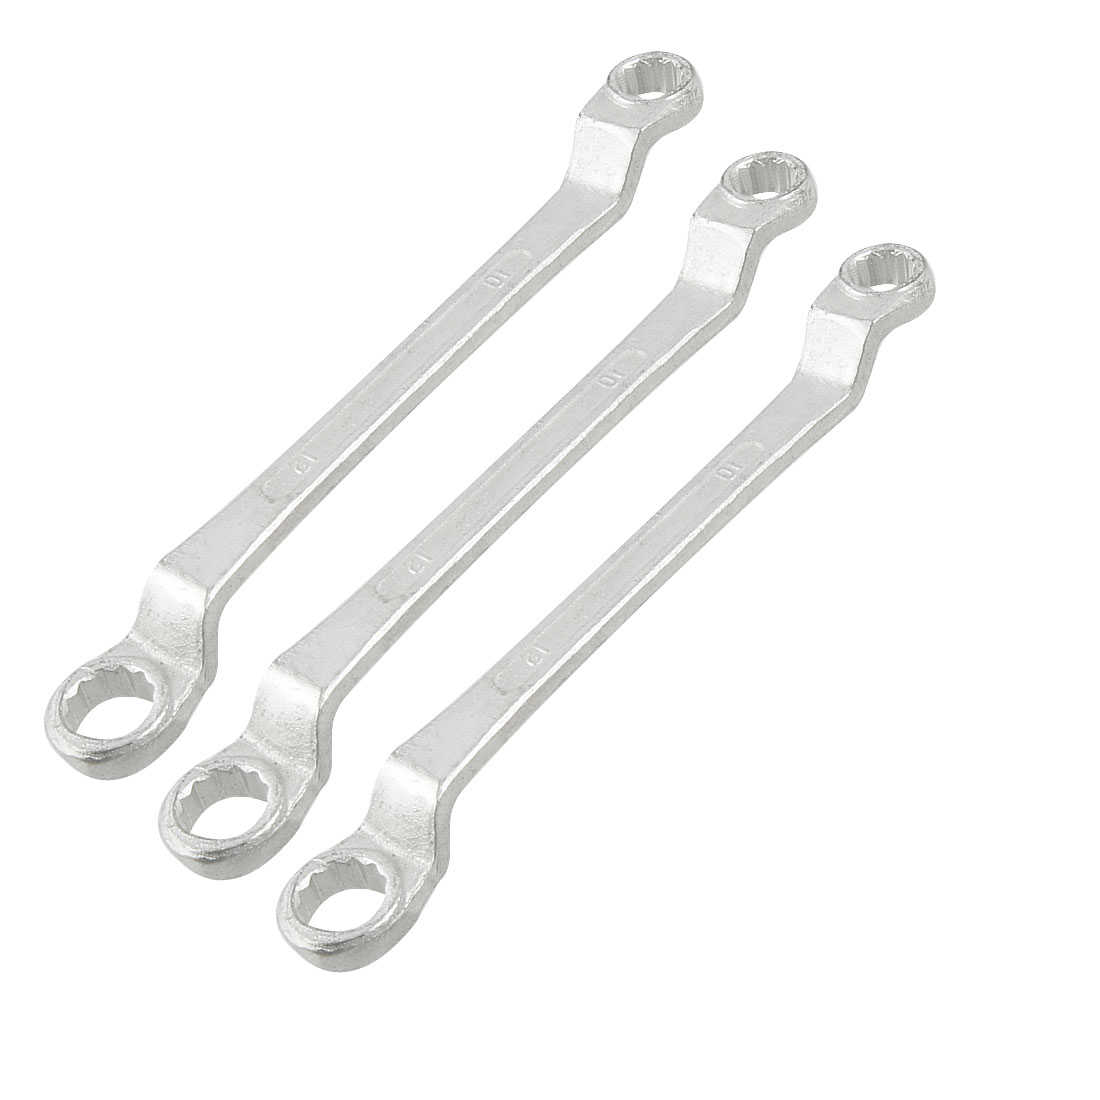 Unique Bargains 3 Pieces Metric 10mm 12mm Double Ended Box End Wrench Spanner